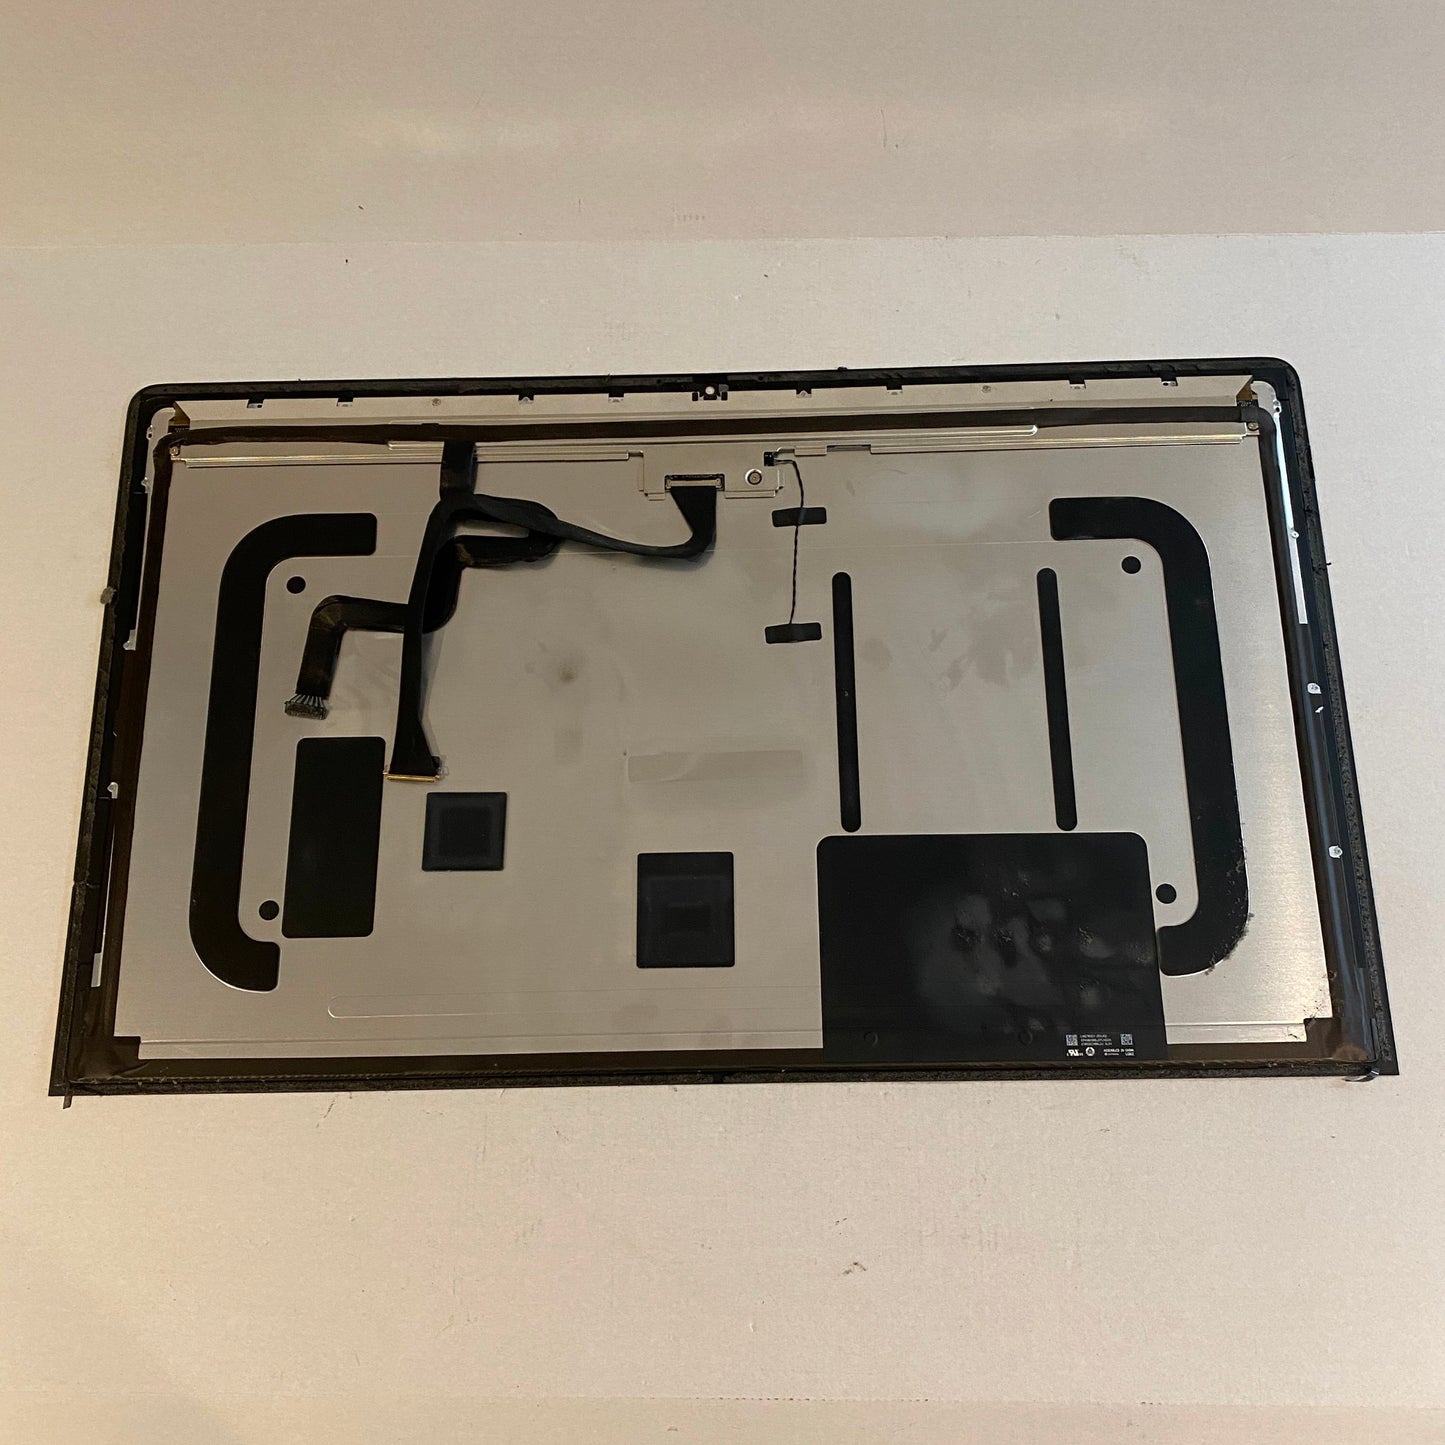 For Parts - Late 2015 27"iMac 5K - LM270QQ1 (SD) (A2)